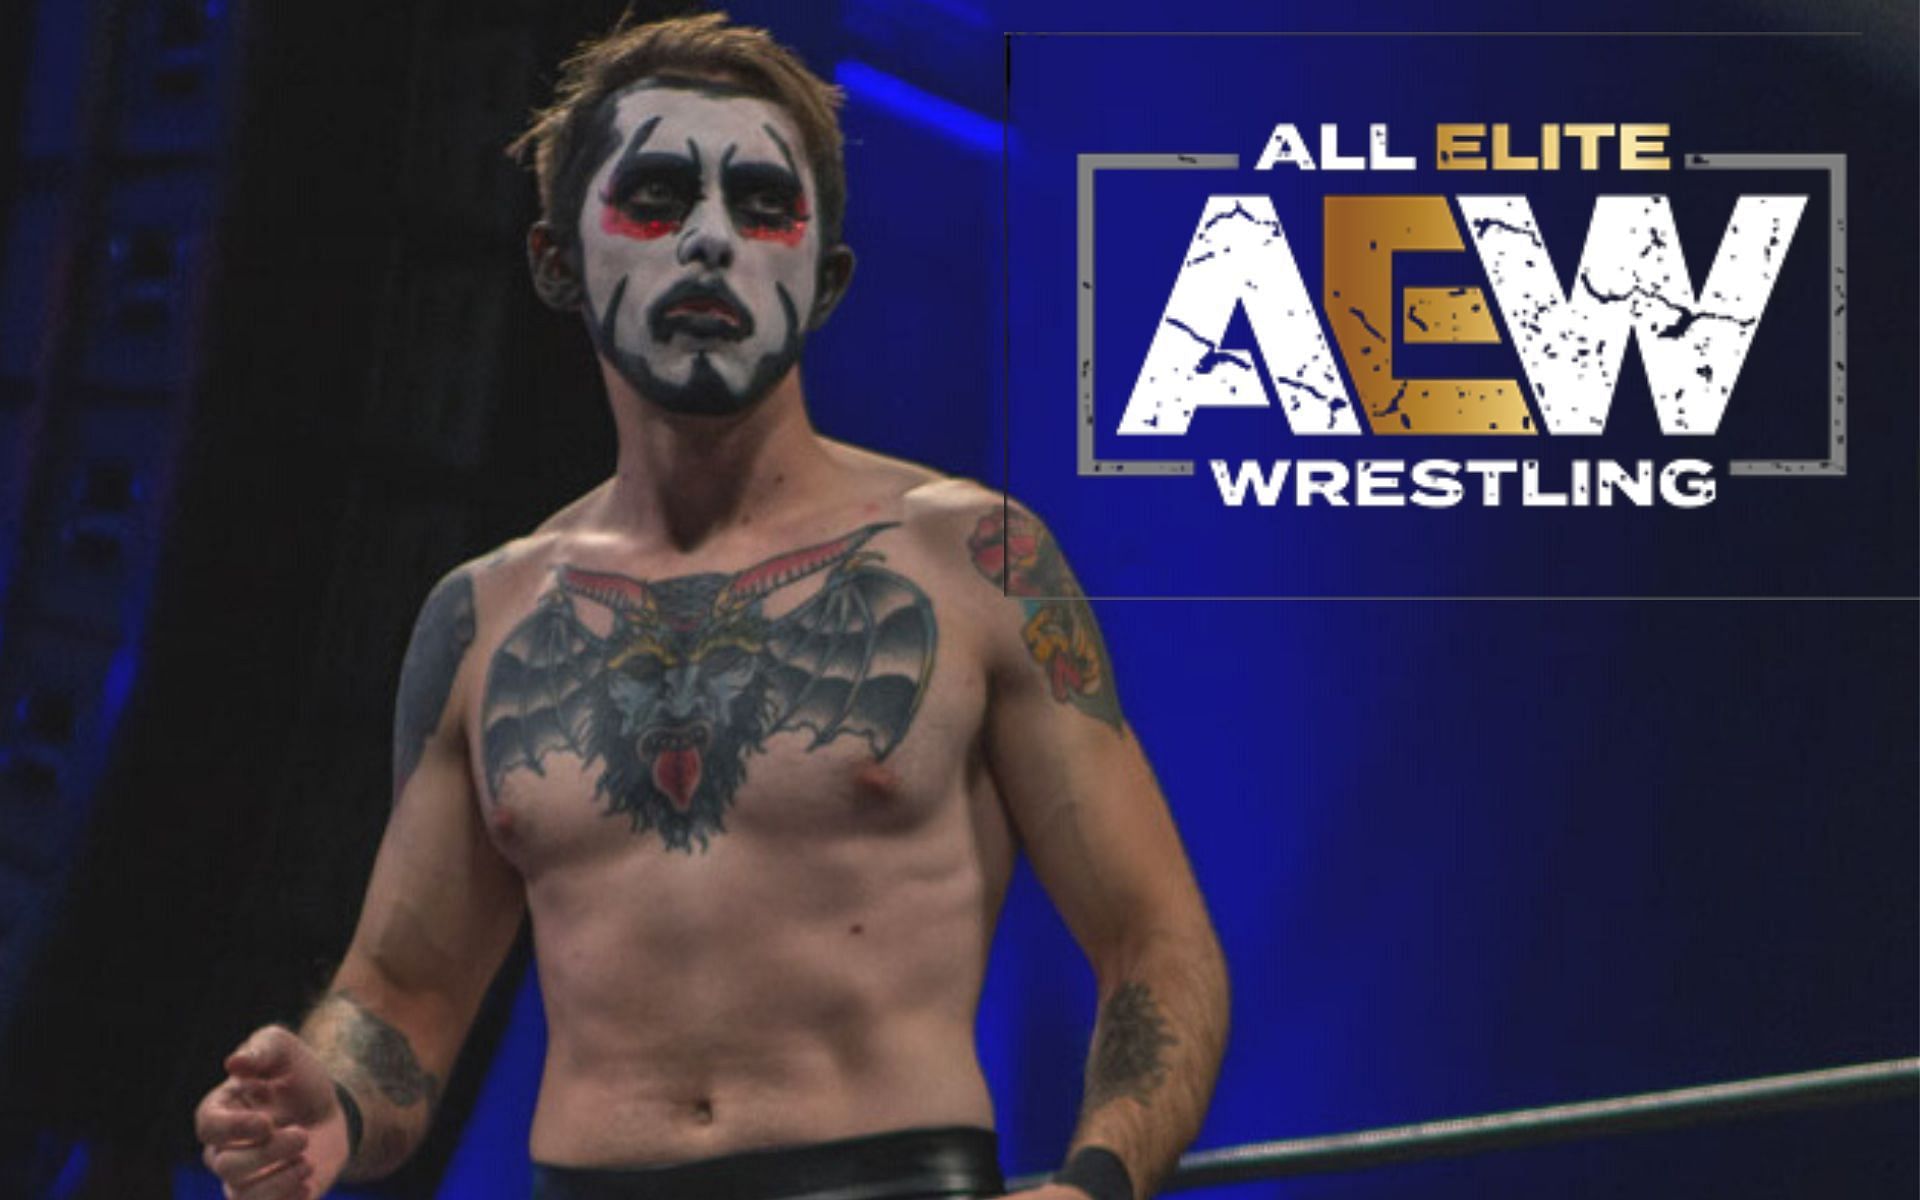 Danhausen made his AEW debut in January this year